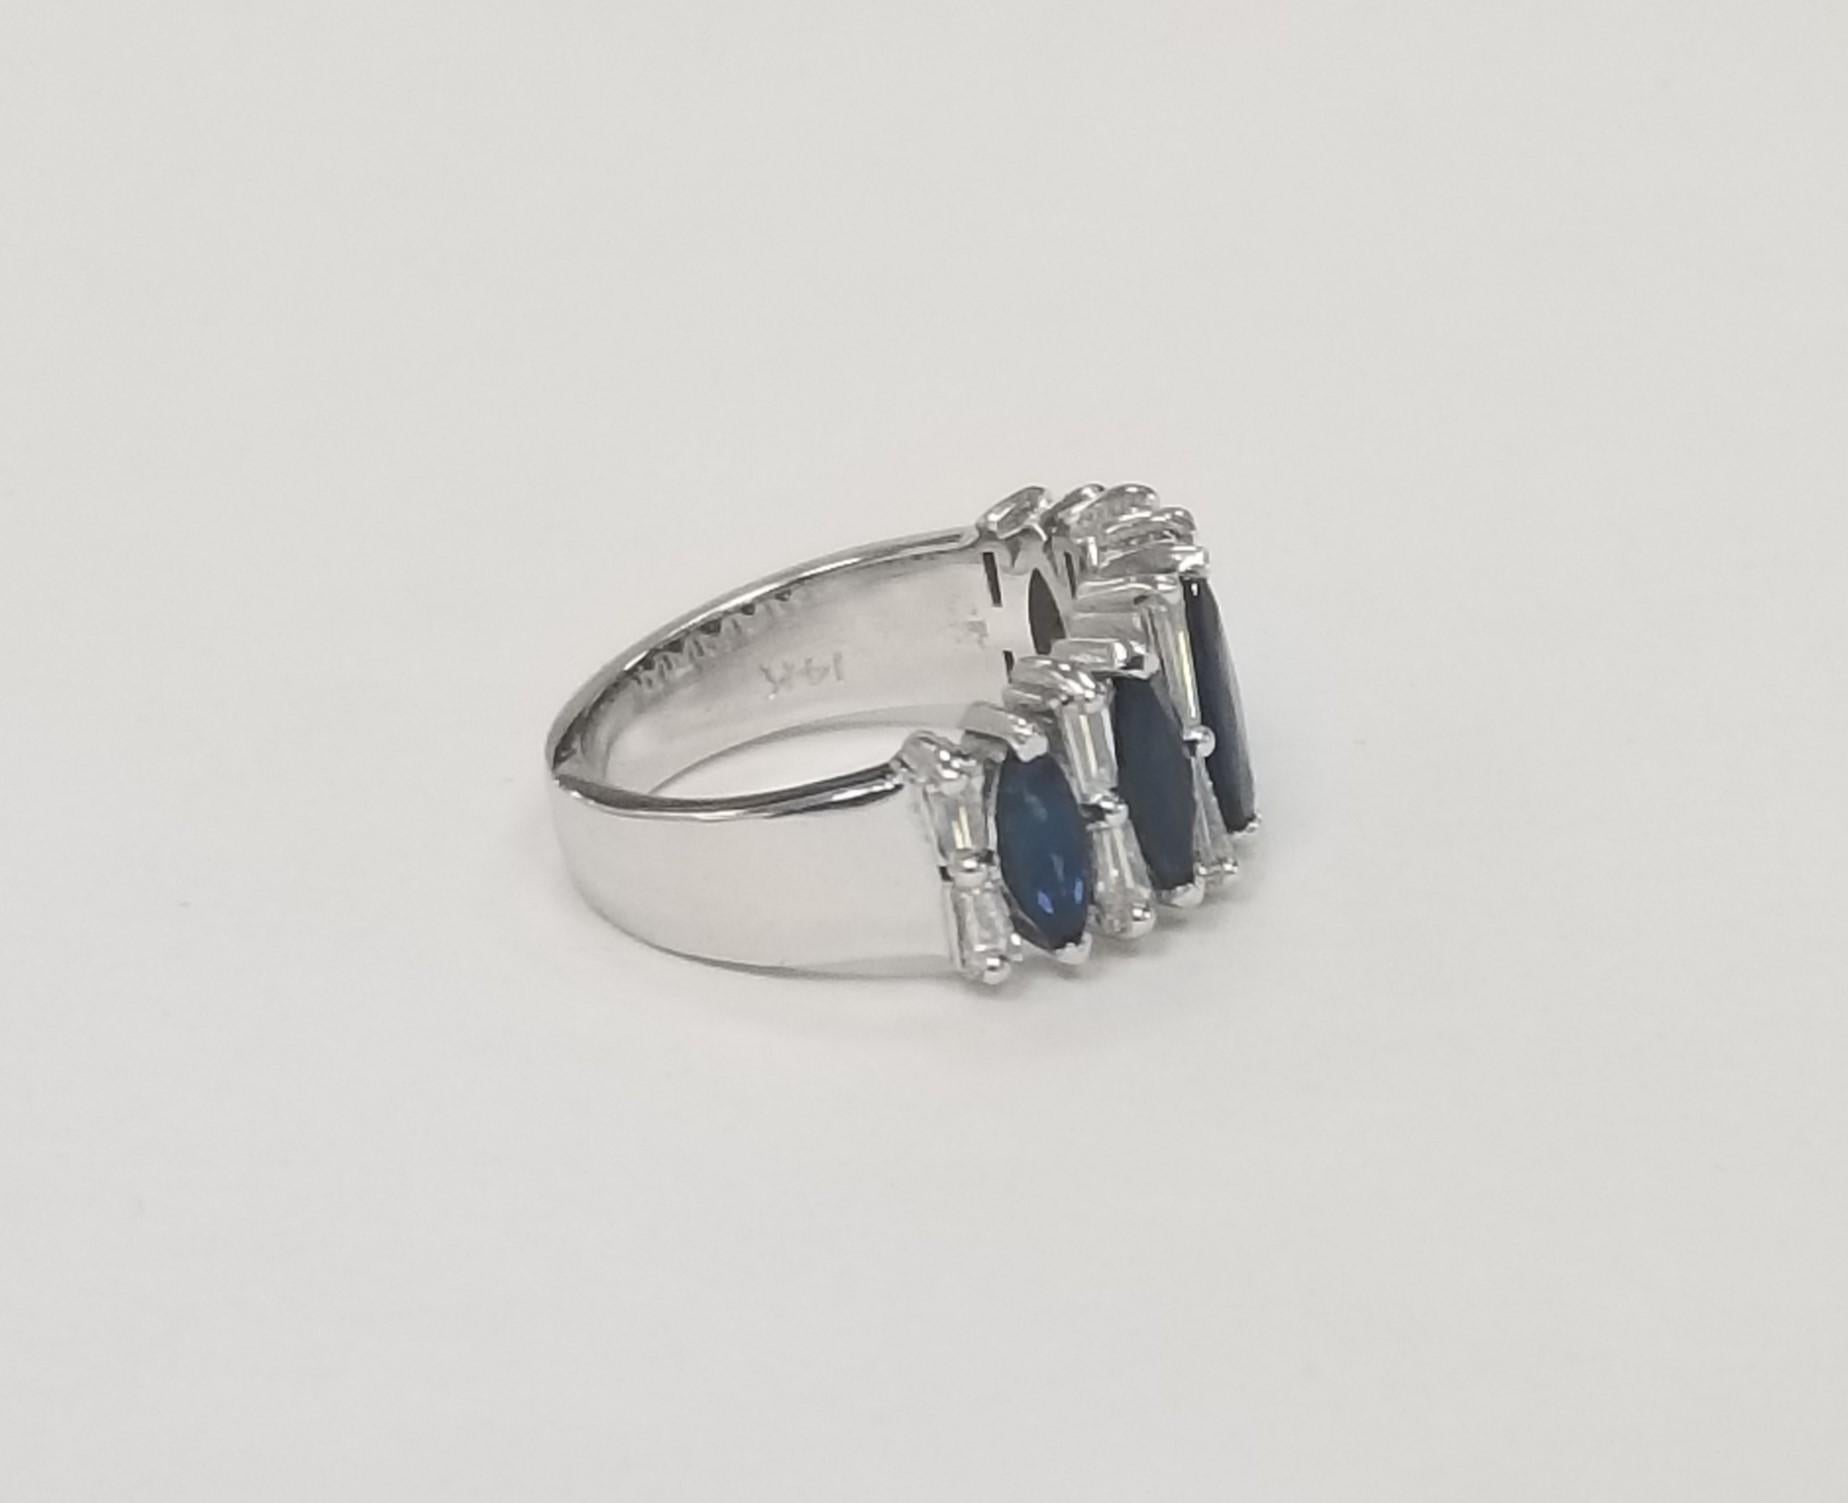 Vintage 14k white gold Marquise Sapphire and Baguette Cut Diamond Wedding Ring . 
Specifications:
Metal: 14K White Gold
Center Stone: 5 Marquise Cut Sapphires 2.25 cts.
Side Stones: 12 Baguette Diamonds .90 cts.
Color: G
Clarity: VS
Size: 6.5US
Gram